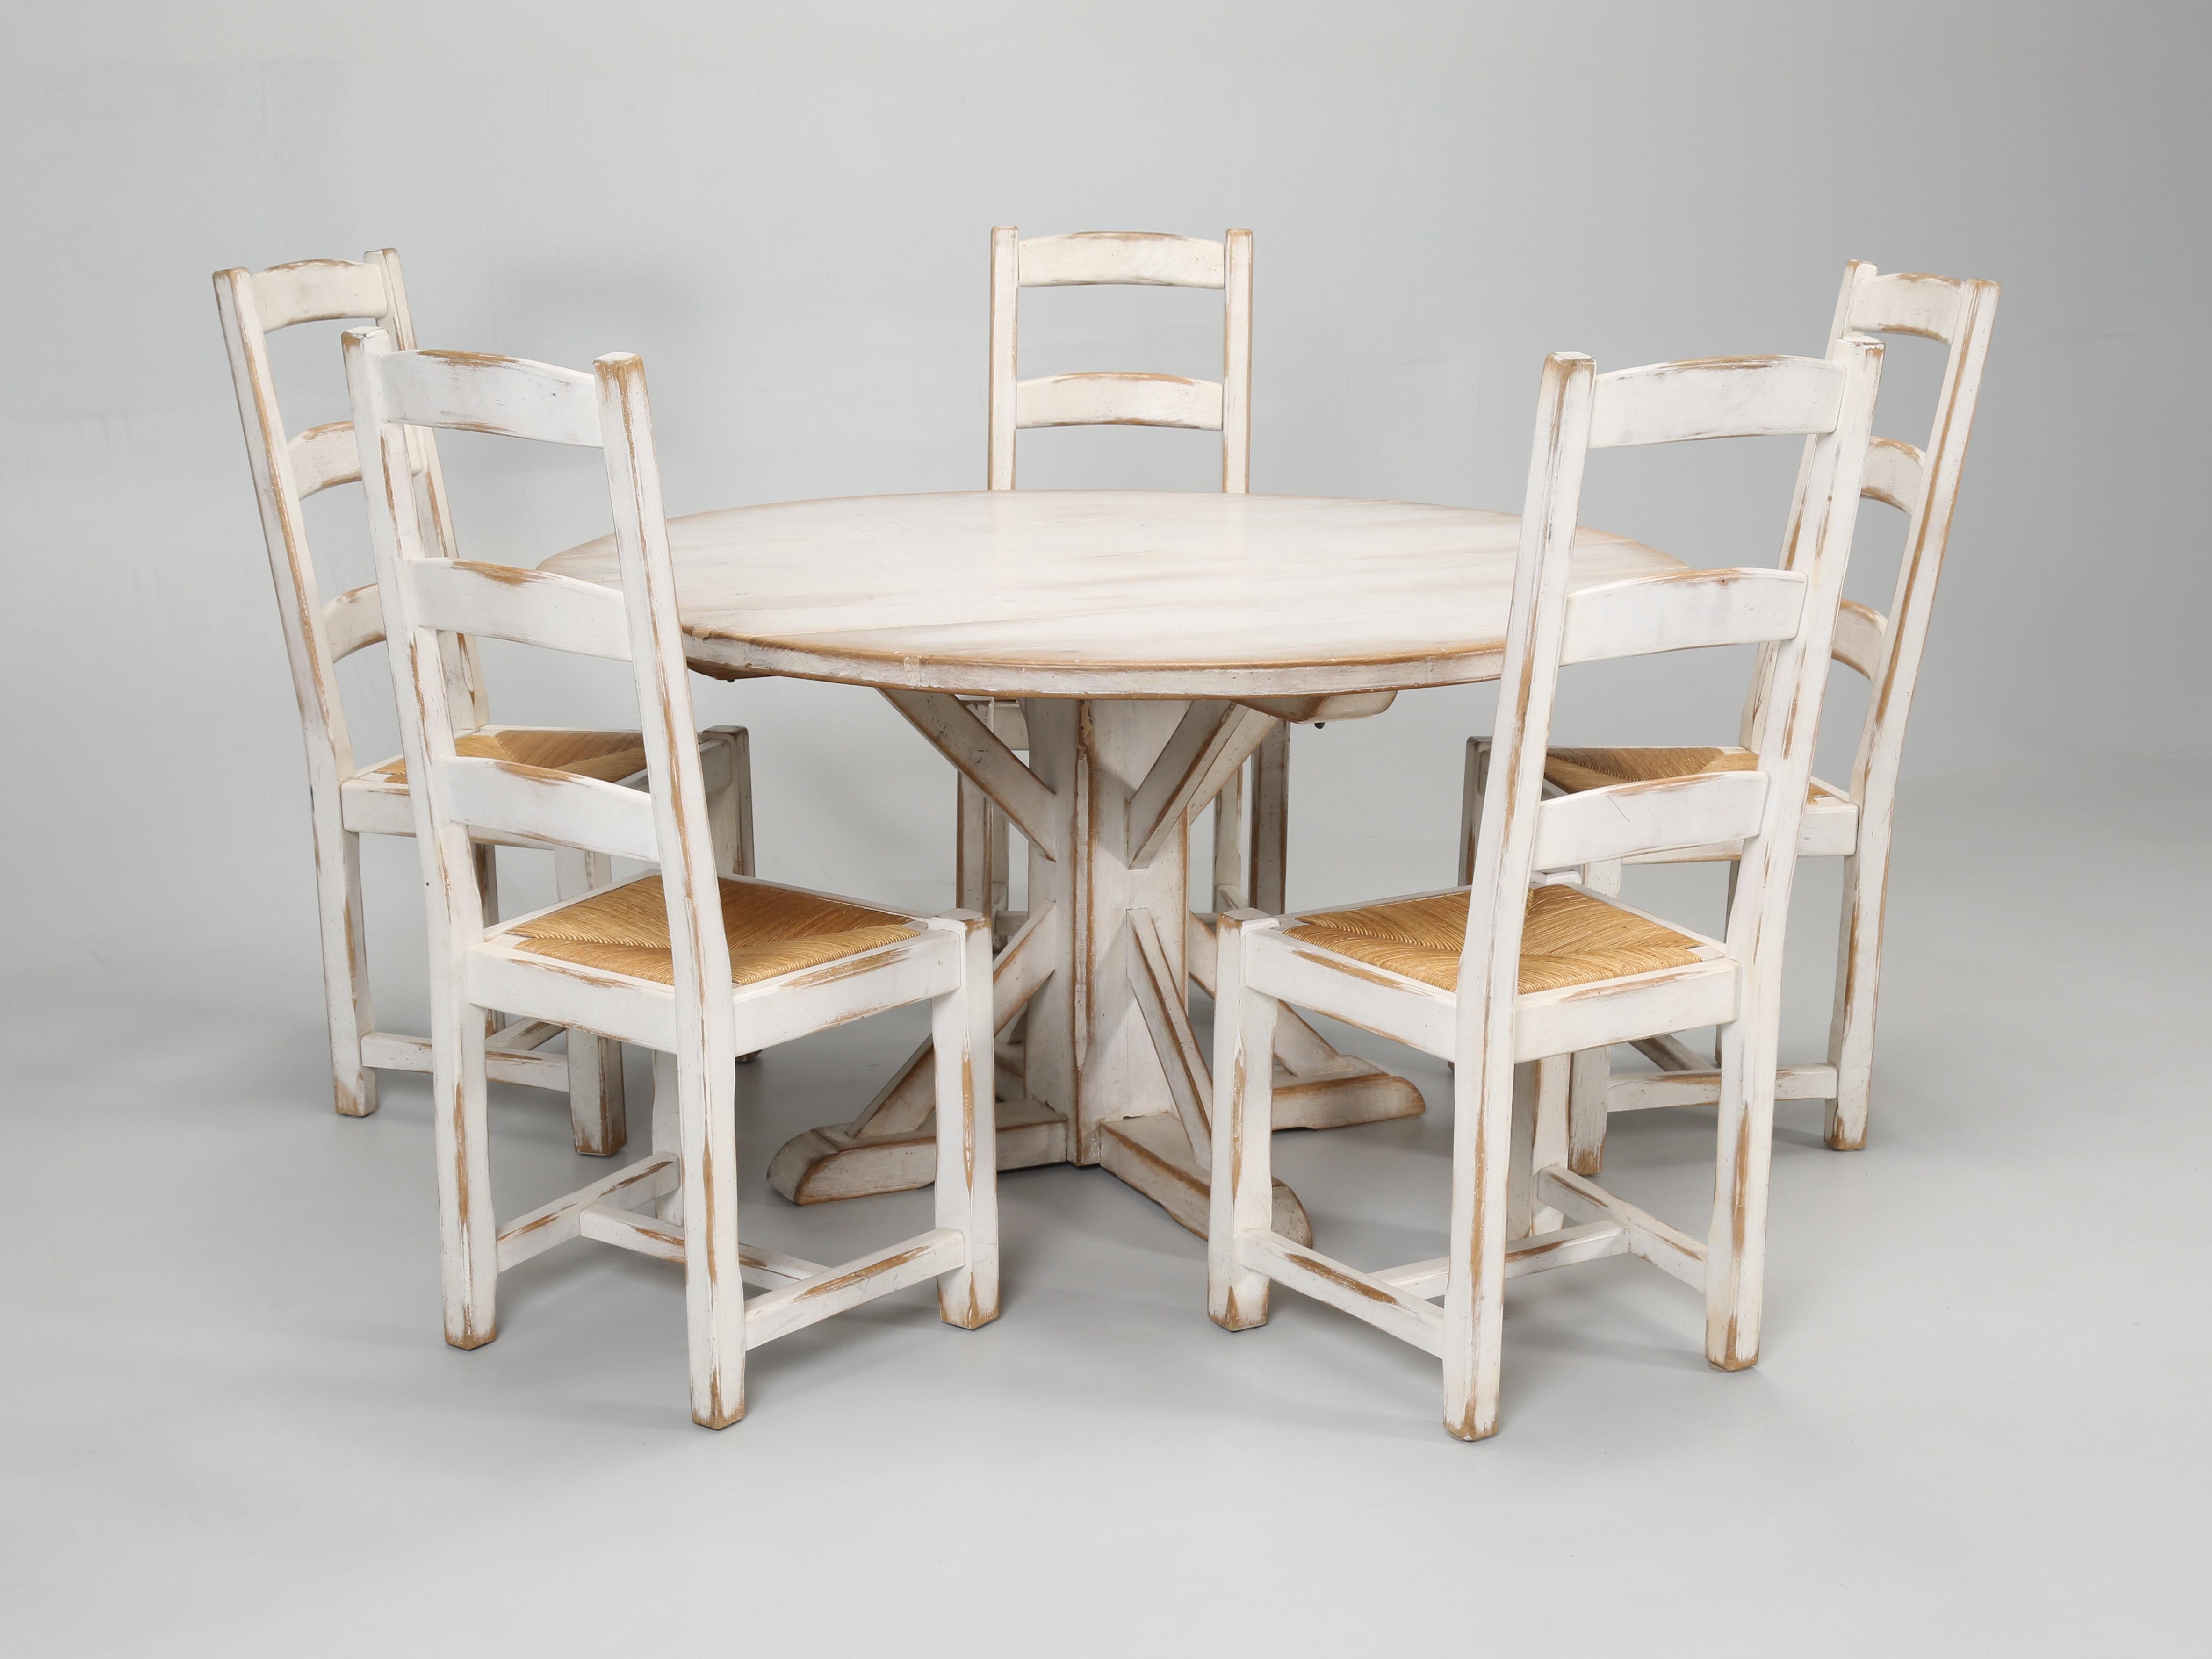 In France, if you wanted a great quality dining table or kitchen table to be fabricated to your specifications, the name Quinta was on everyone’s short list. We started purchasing from Quinta about 30-years ago and to this day, we have never seen